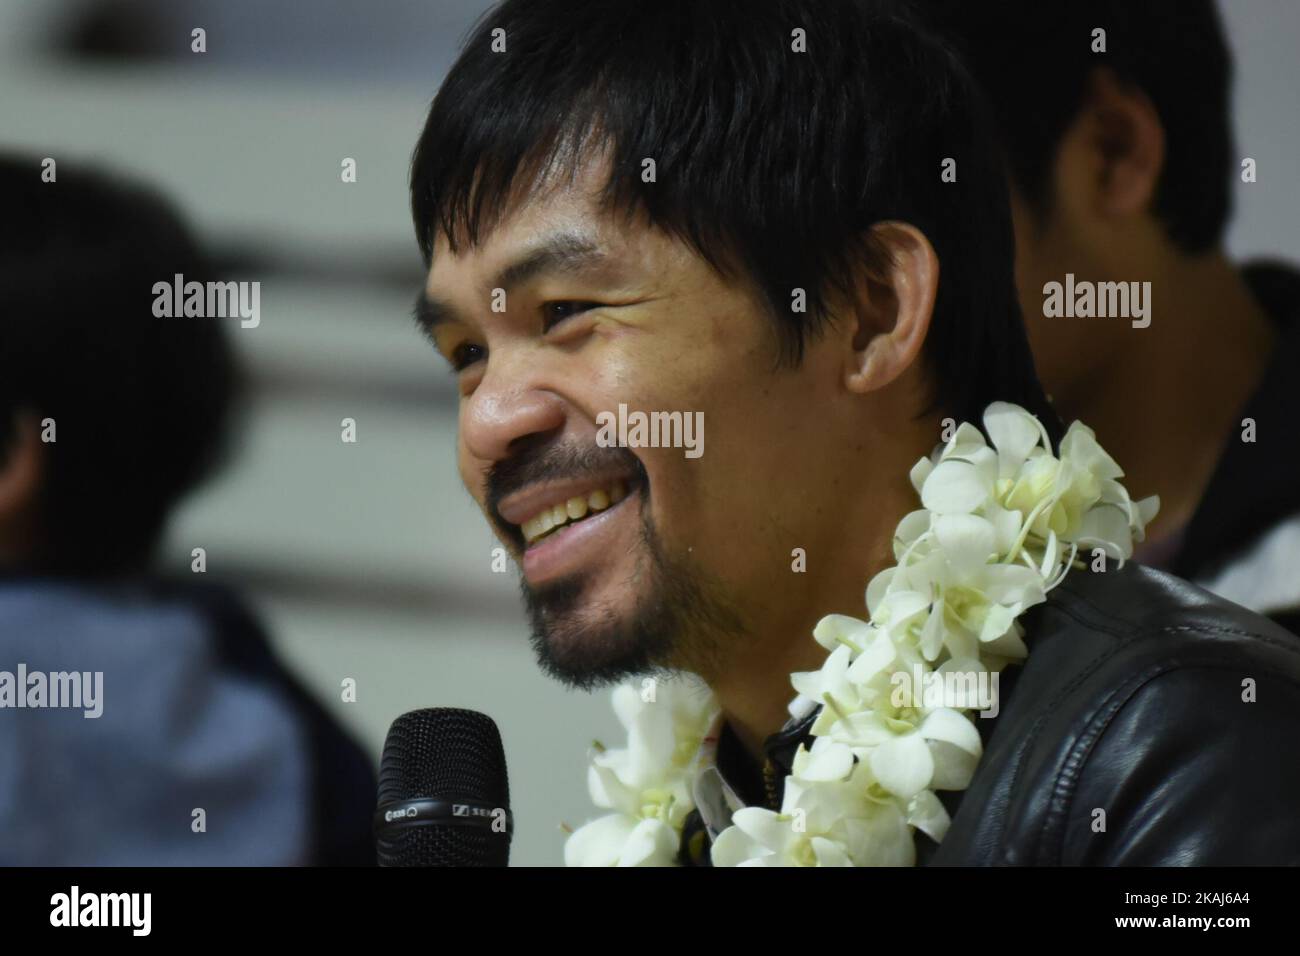 Filipino boxing icon Manny Pacquiao shares a light moment with members of the press upon his arrival at the Ninoy Aquino International Airport in Manila on 14 April 2016. Pacquiao announced his retirement from the sport after his win over American boxer Timothy Bradley in the WBO International Welterweight Championship title bout. He made the decision to retire to focus on his family and political ambitions as he is running for a senate seat in the upcoming Philippine elections. (Photo by George Calvelo/NurPhoto) *** Please Use Credit from Credit Field *** Stock Photo